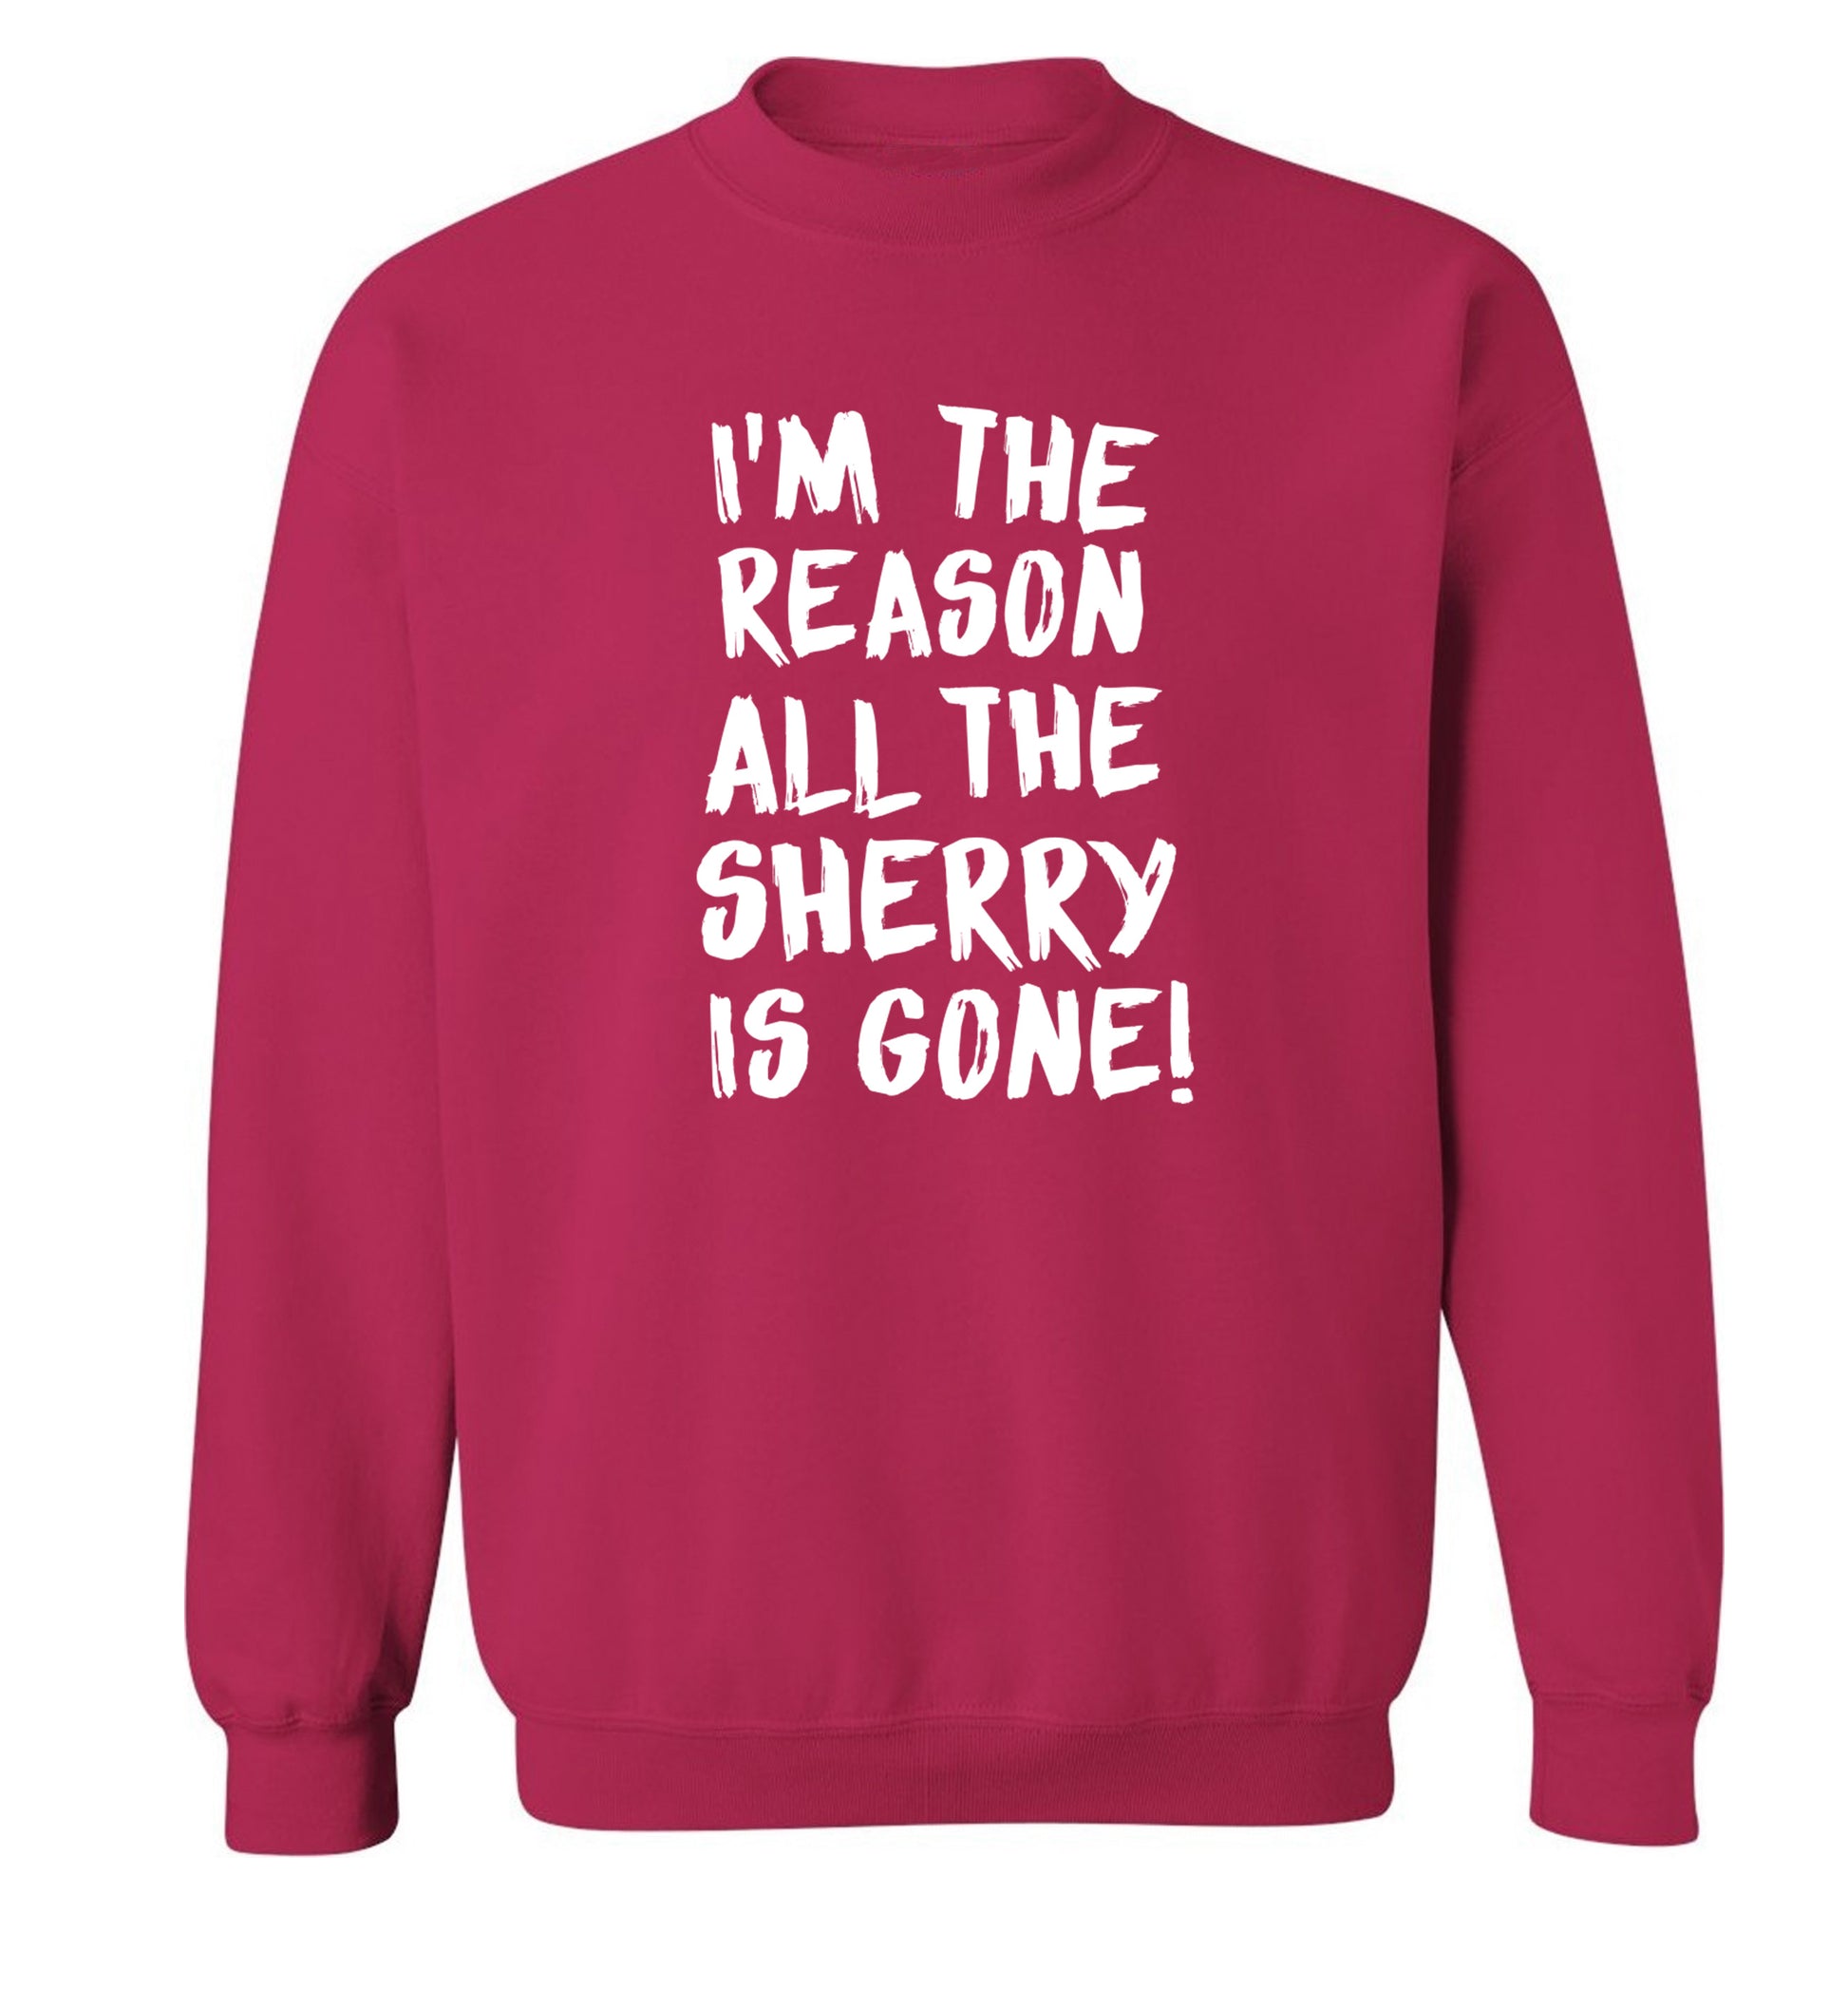 I'm the reason all the sherry is gone Adult's unisex pink Sweater 2XL